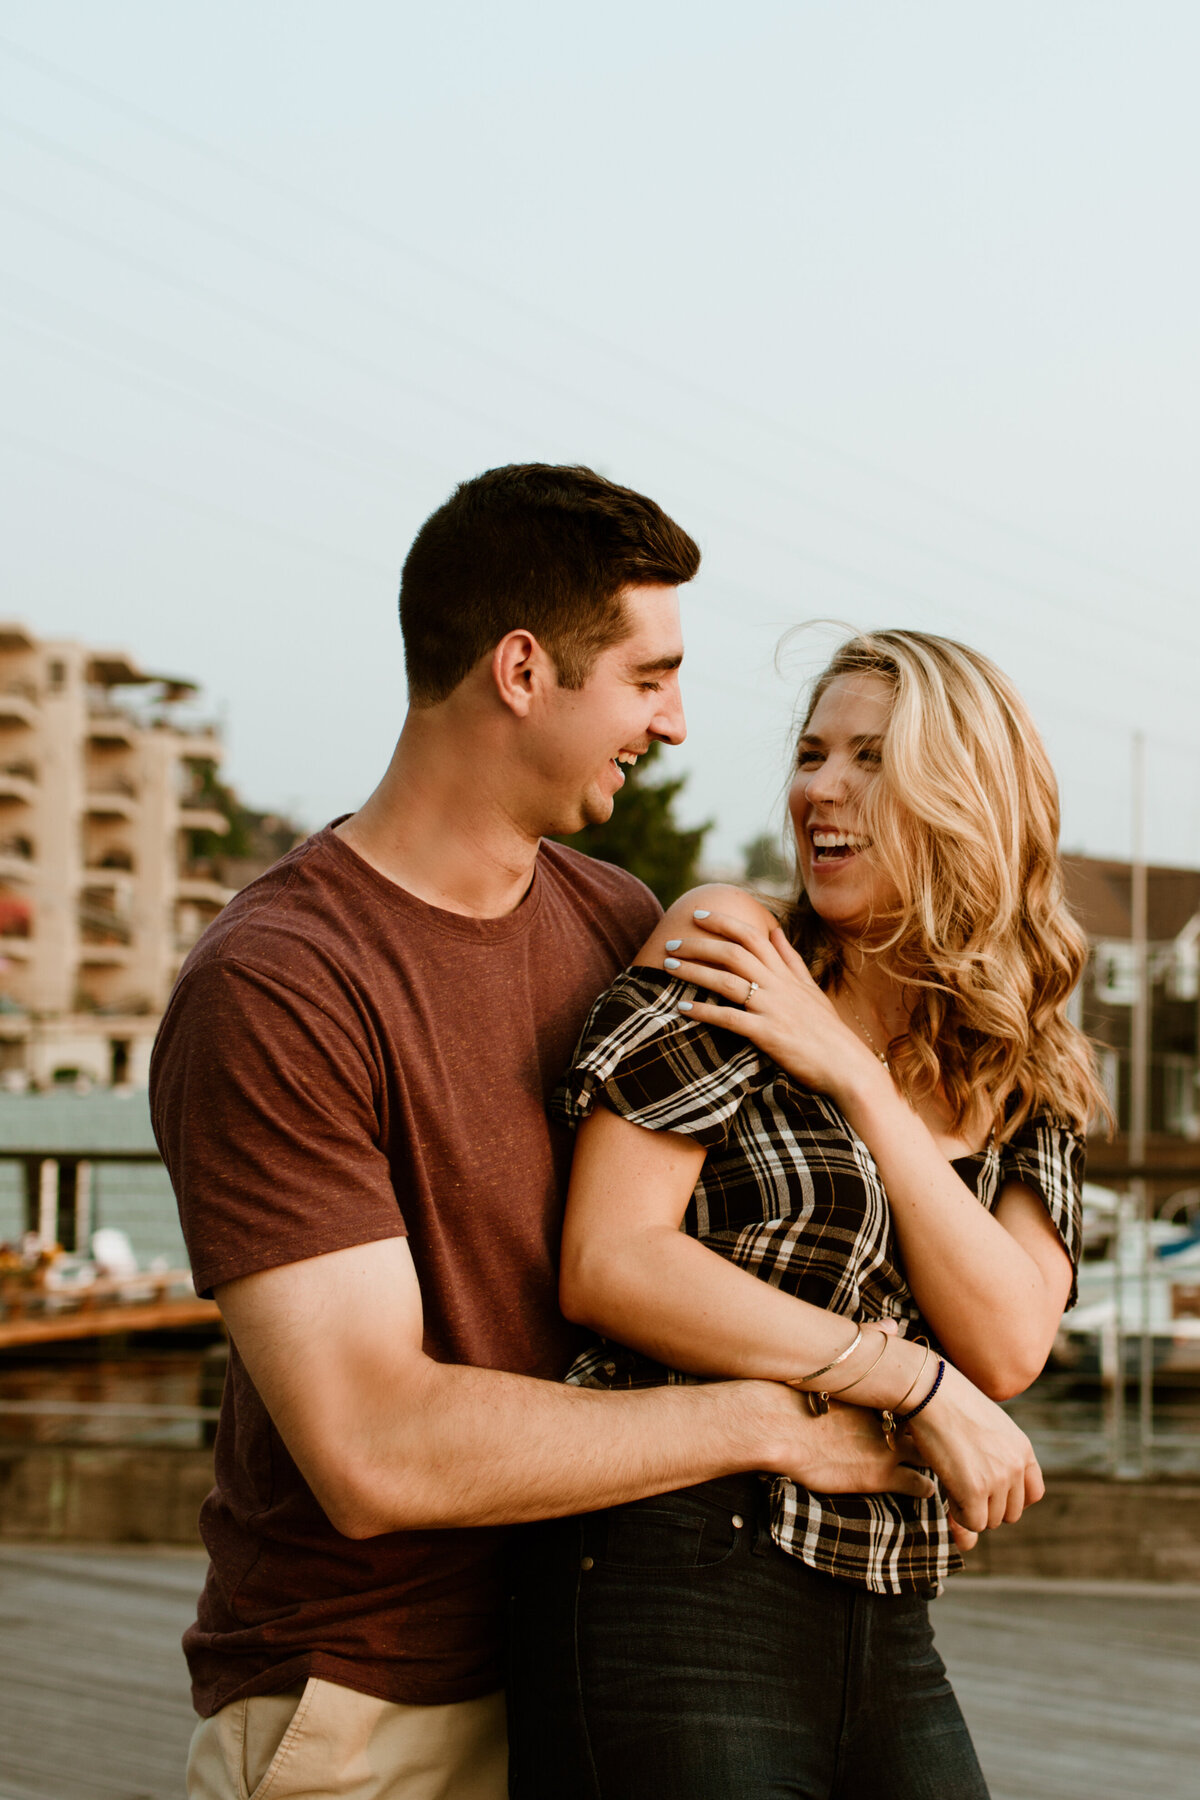 A candid and playful engagement session at sunset captured by Fort Worth Wedding Photographer, Megan Christine Studio